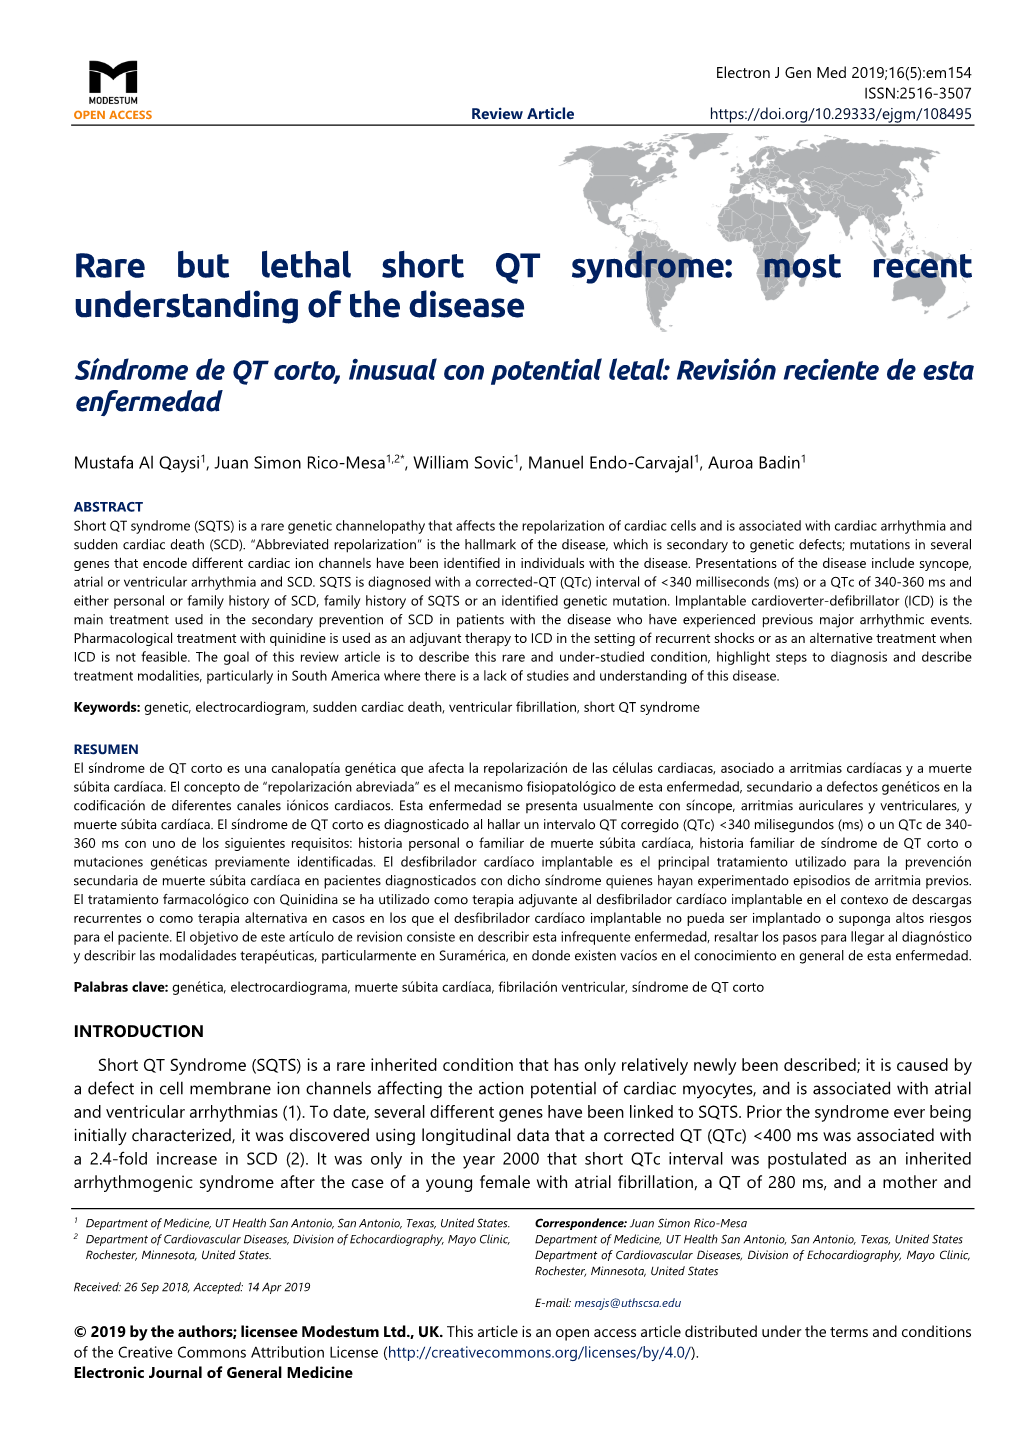 Rare but Lethal Short QT Syndrome: Most Recent Understanding of the Disease